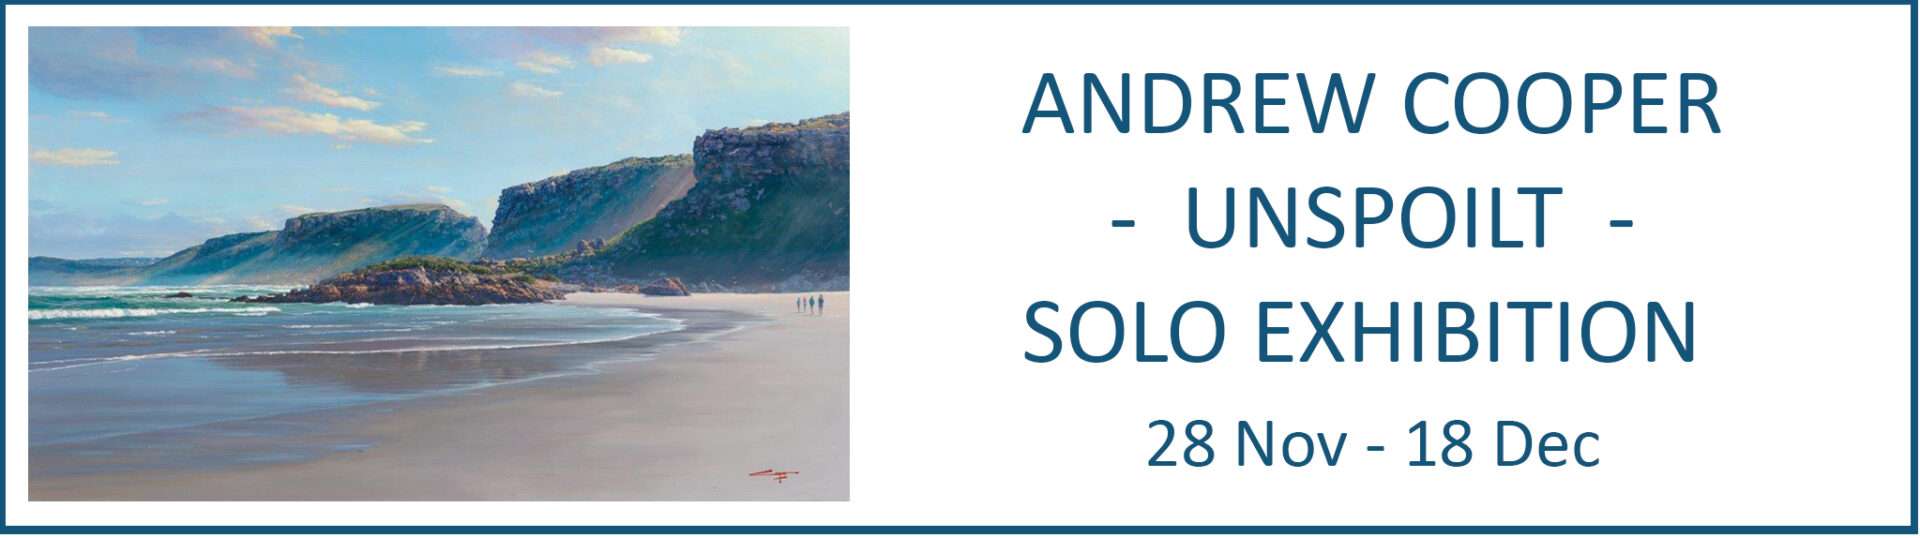 The Studio Art Gallery - Unspoilt - Solo Exhibition by Andrew Cooper